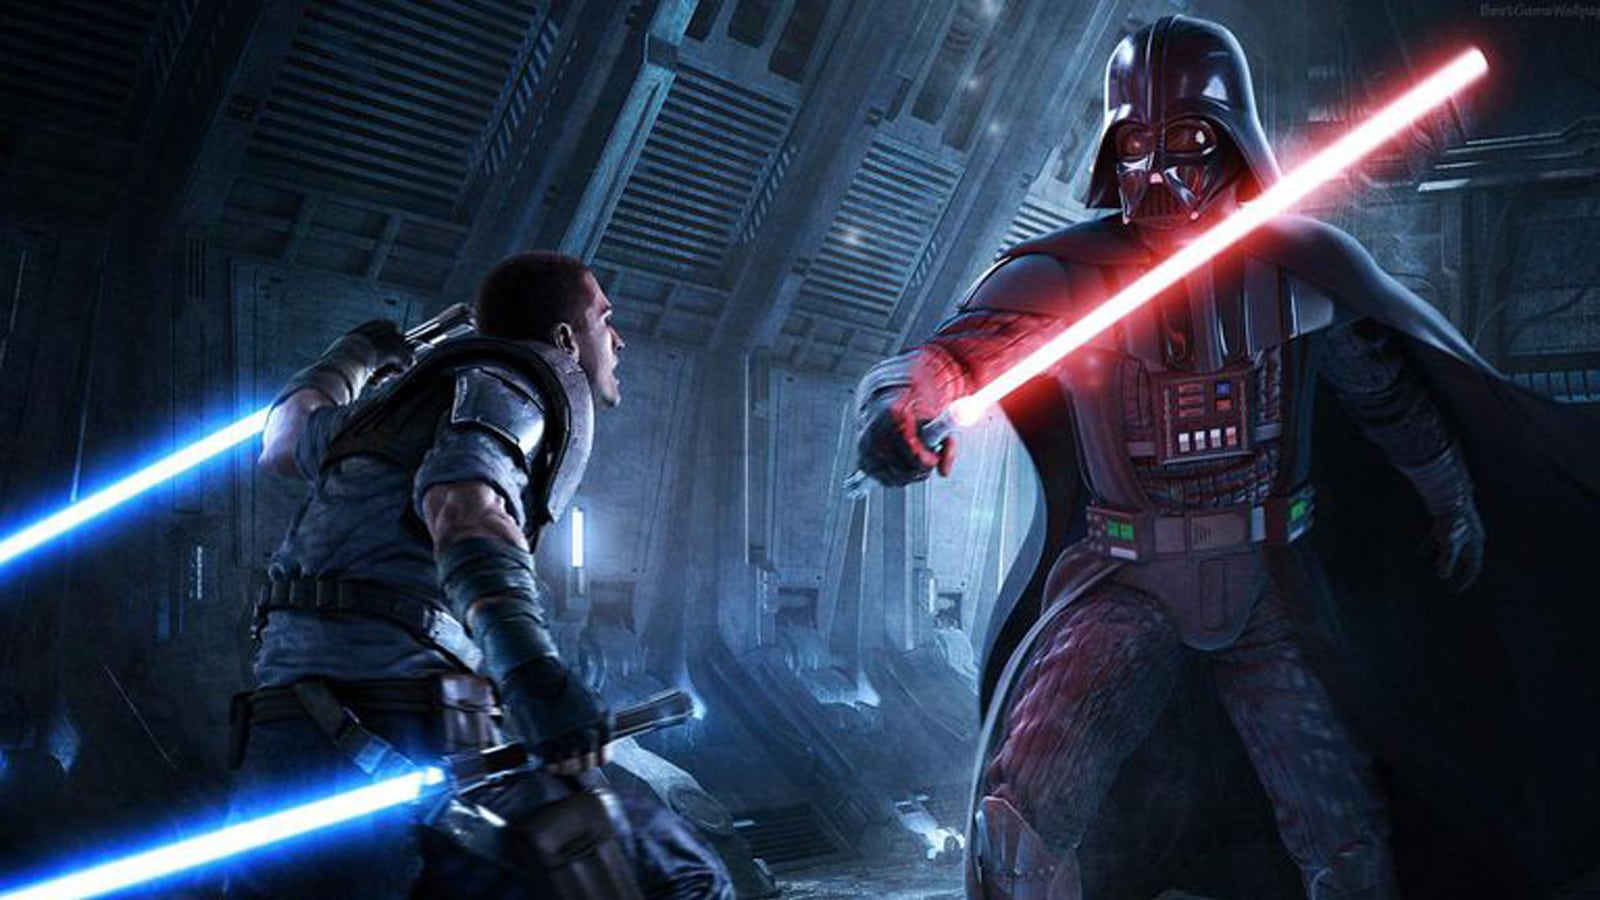 we need realistic hate and pain Sith lord Darth Vader Star Wars video game simulation from Lucasfilm Games